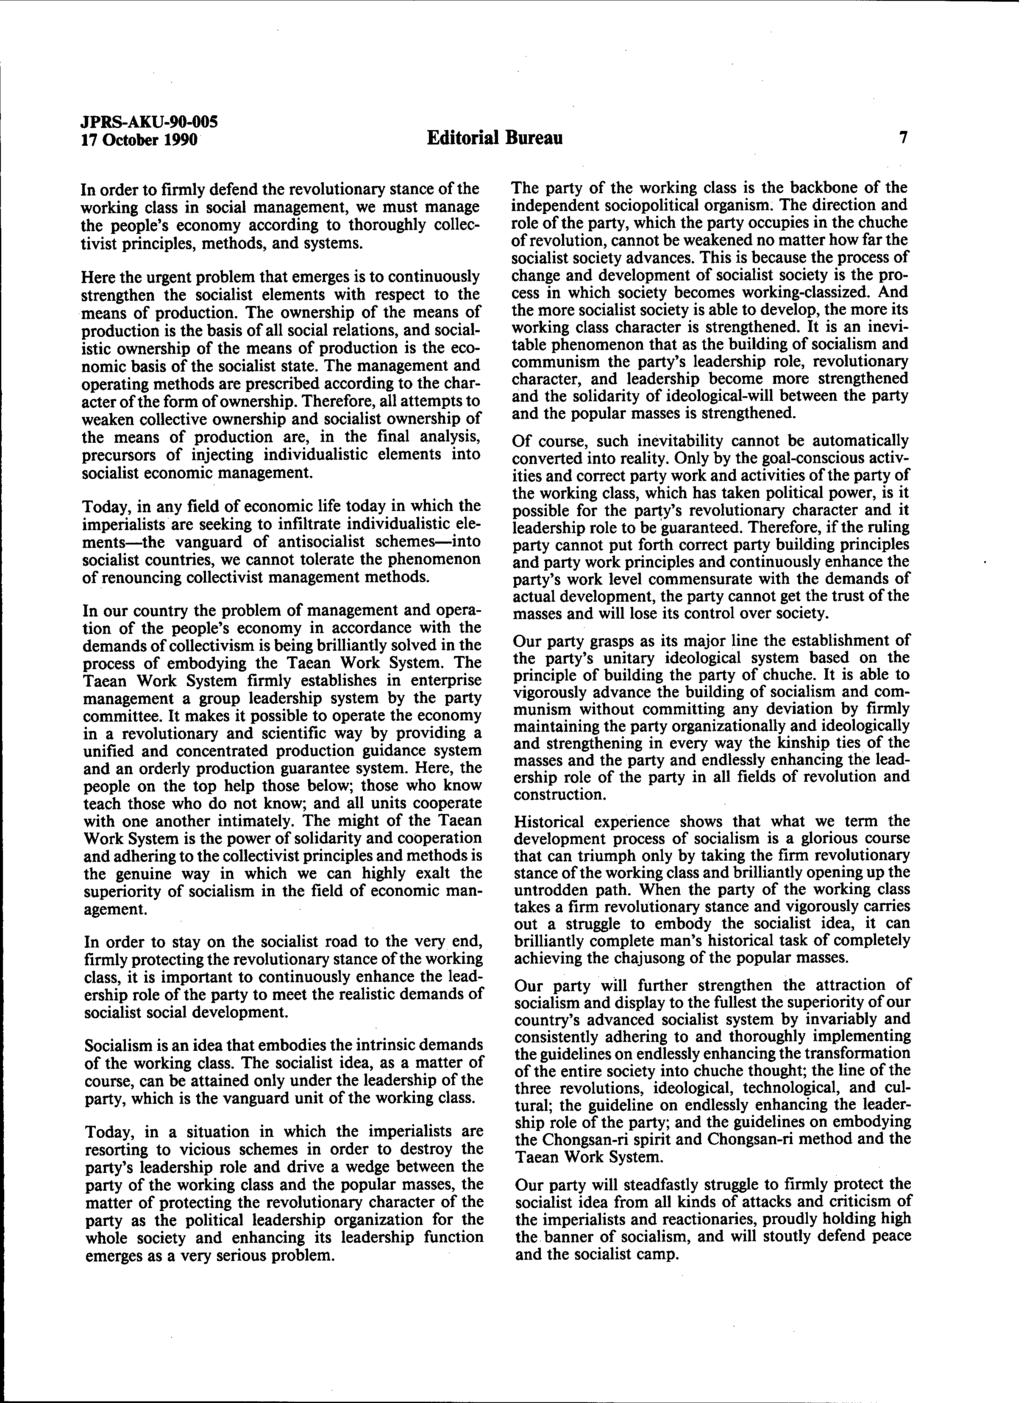 JPRS-AKU-90-005 17 October 1990 Editorial Bureau In order to firmly defend the revolutionary stance of the working class in social management, we must manage the people's economy according to